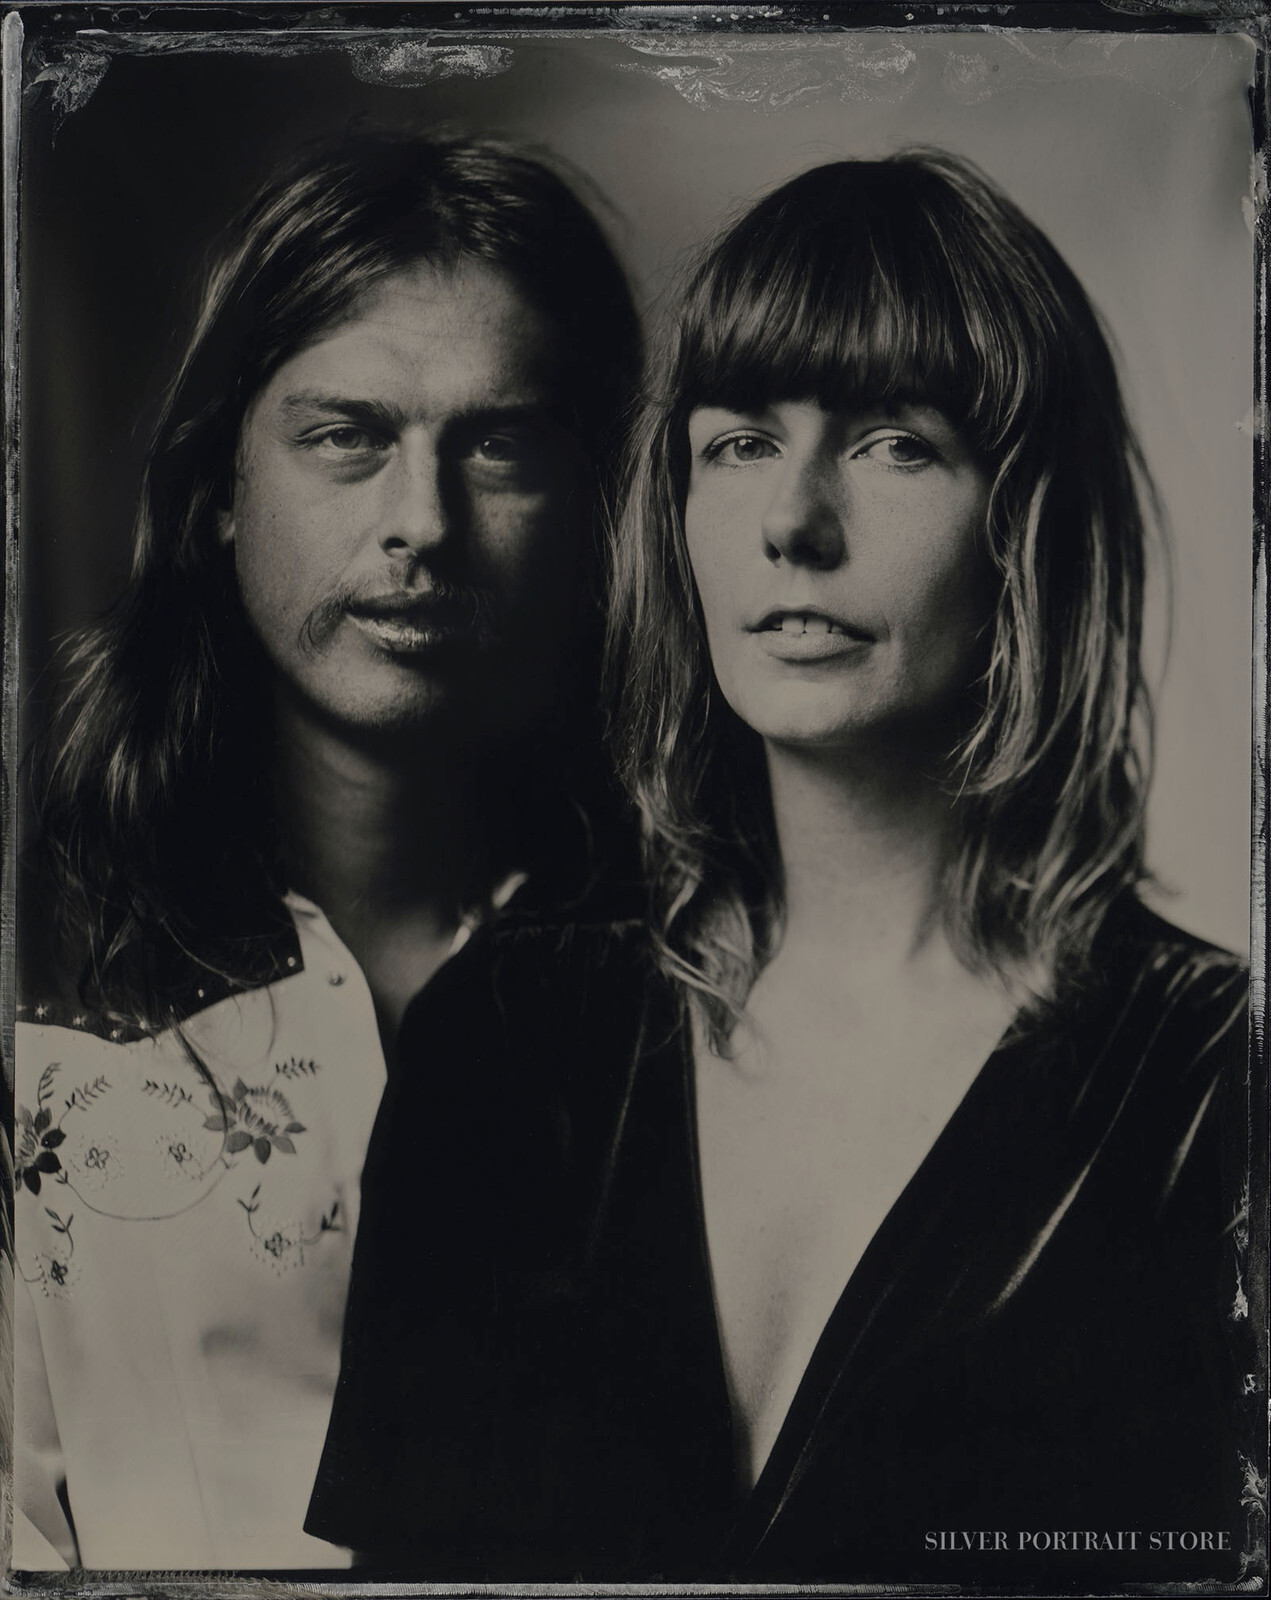 Pablo & Nikki-Silver Portrait Store-scan from Wet plate collodion-Tintype 10 x 12 cm.